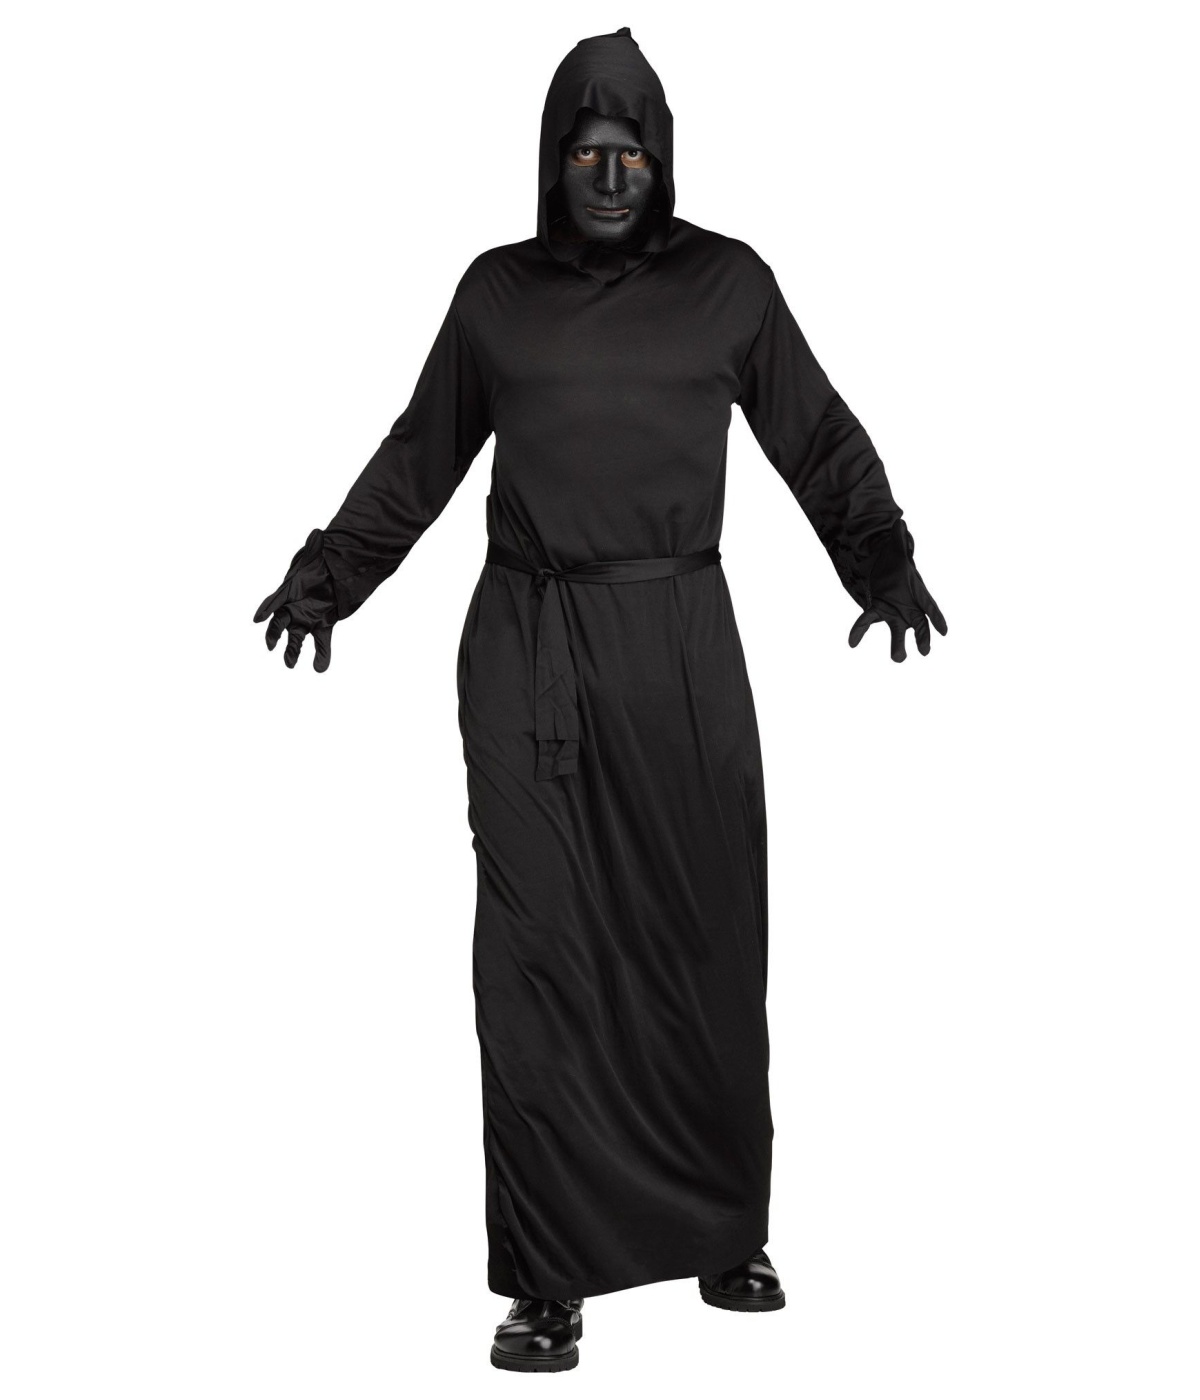  Mens Haunted Faceless Ghost Costume